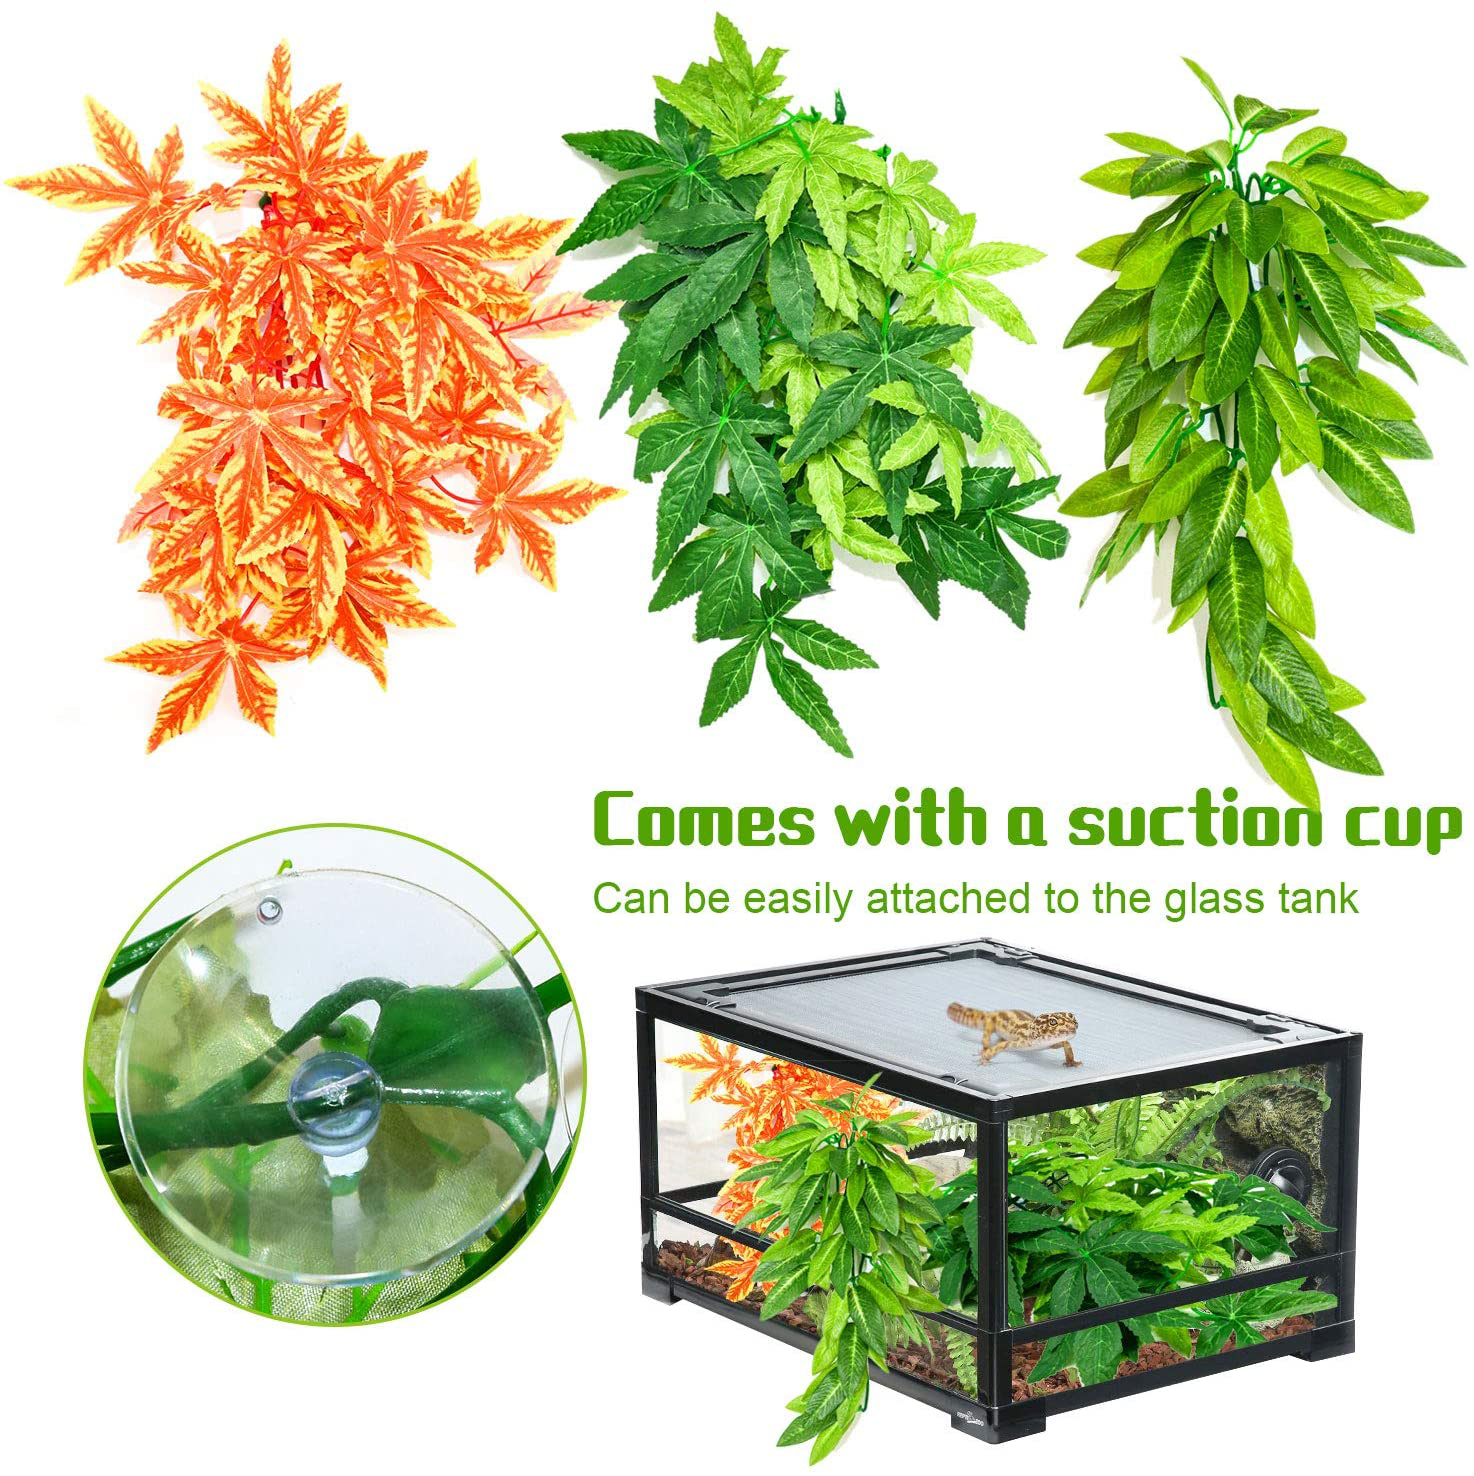 HYLYUN 3 Pack Reptile Plants - Hanging Silk Terrarium Plant with Suction Cup for Bearded Dragons Lizards Geckos Snake Hermit Crab Tank Habitat Decorations